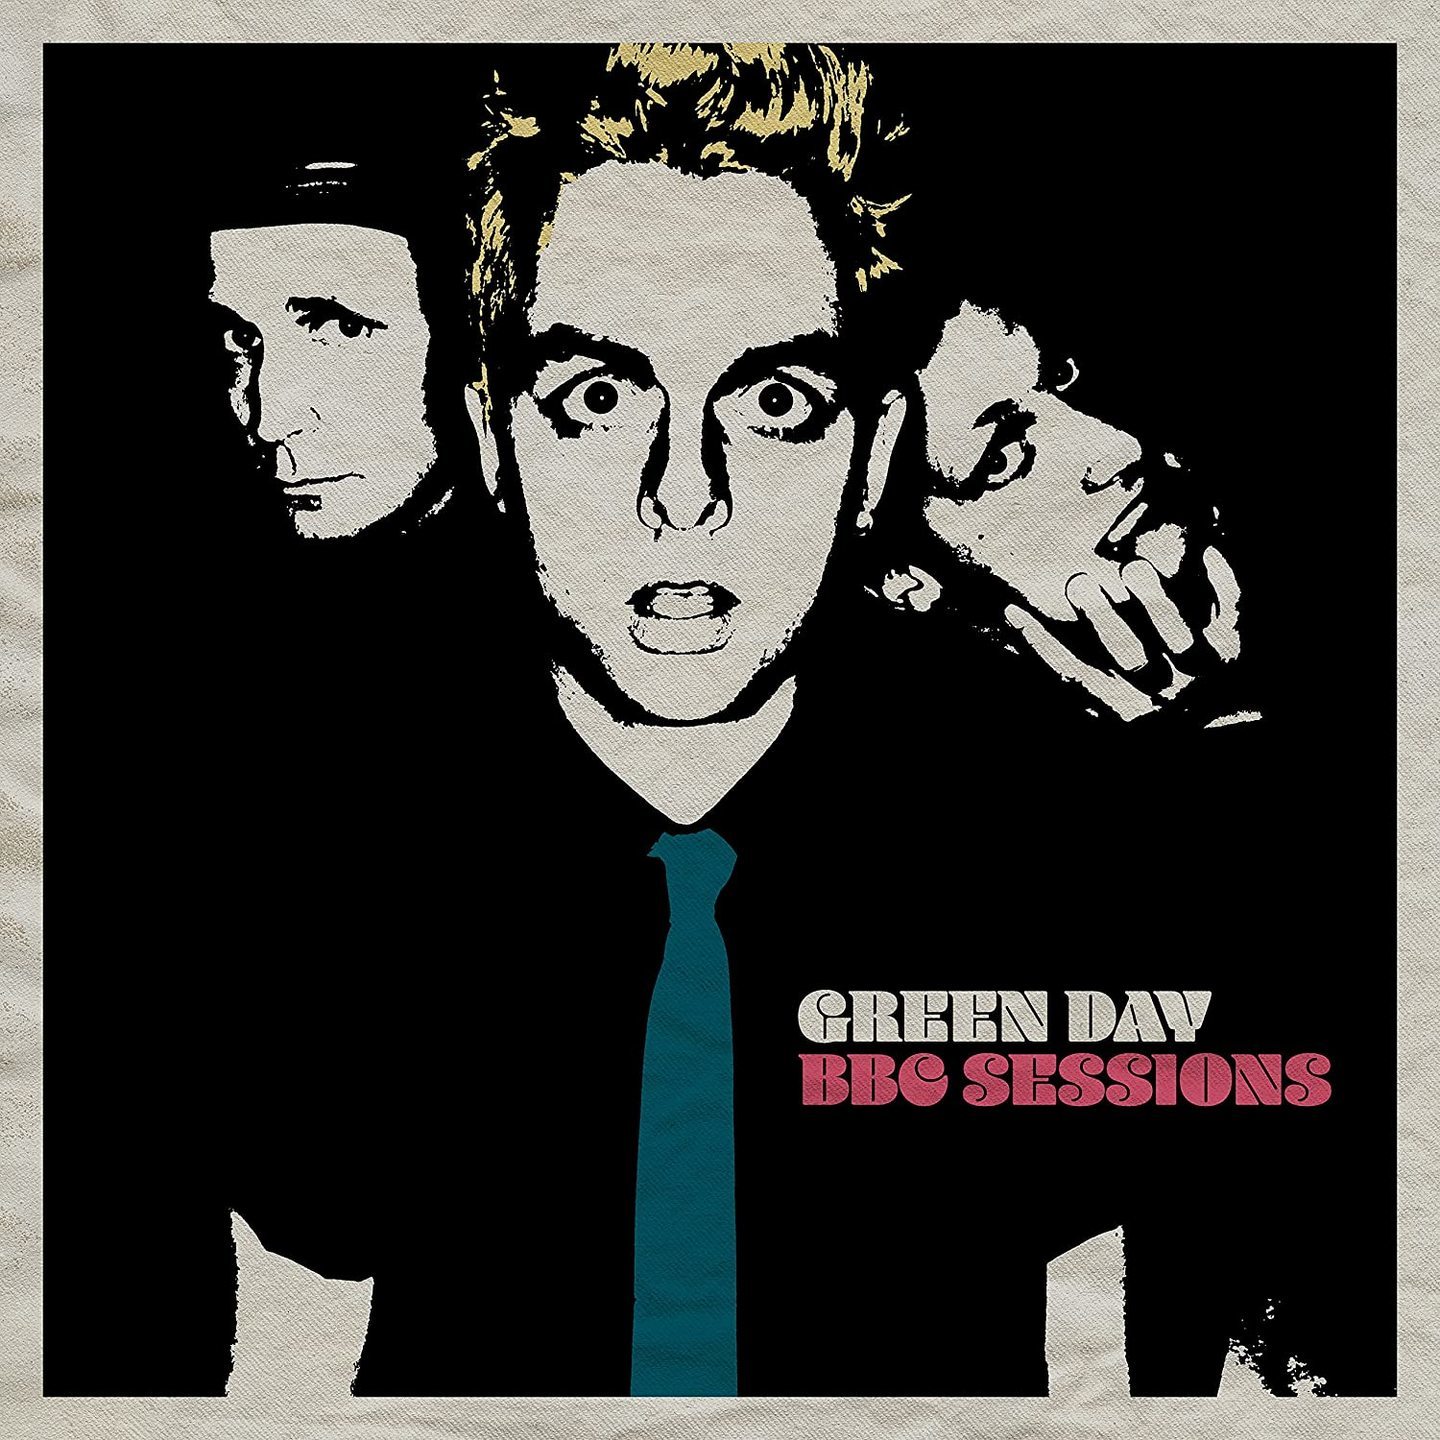 GREEN DAY - BBC Sessions 2xLP